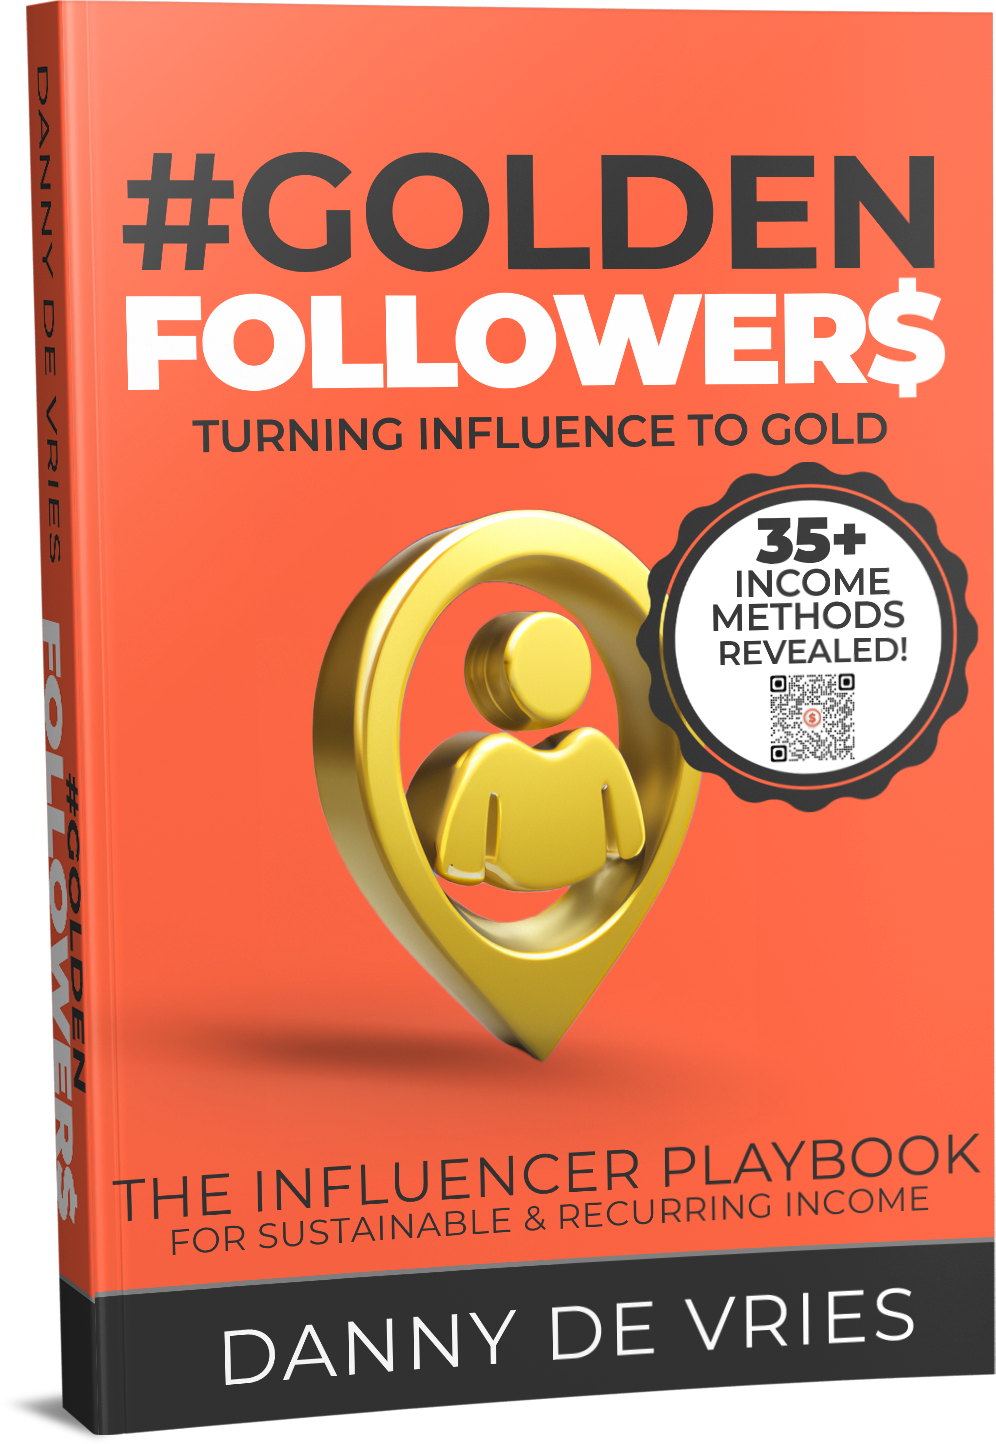 New Book Release: "#GOLDENFOLLOWER$ - Turning Influence To Gold" – a Guide for Influencers Preparing for a TikTok Ban & Securing Sustainable Income